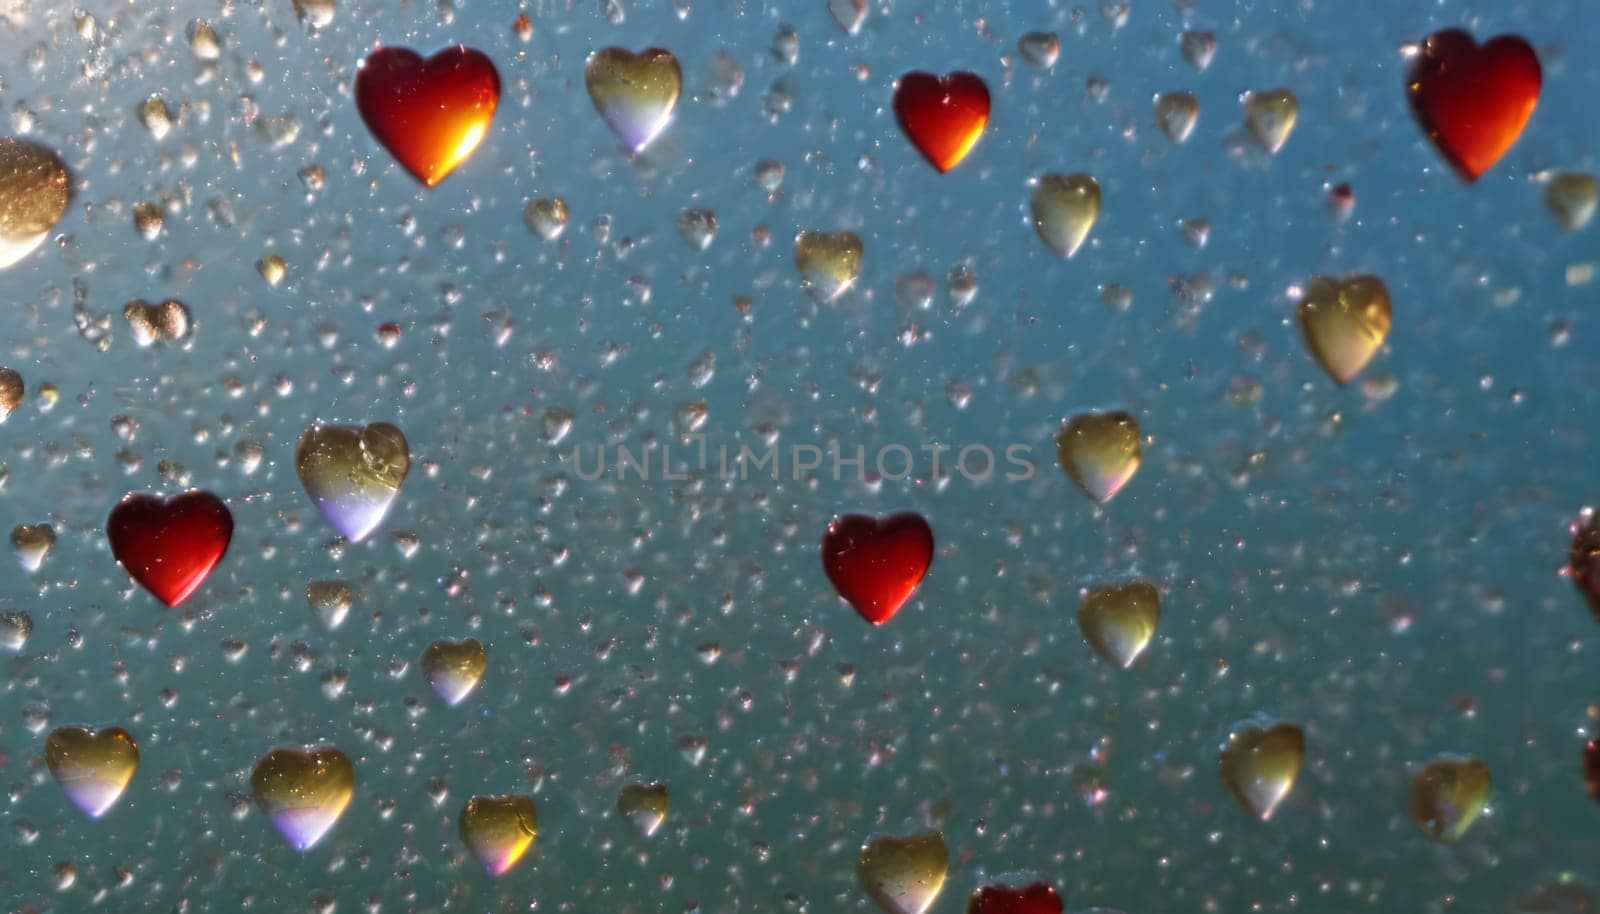 Rainbow Glass Hearts on Transparent Background by nkotlyar